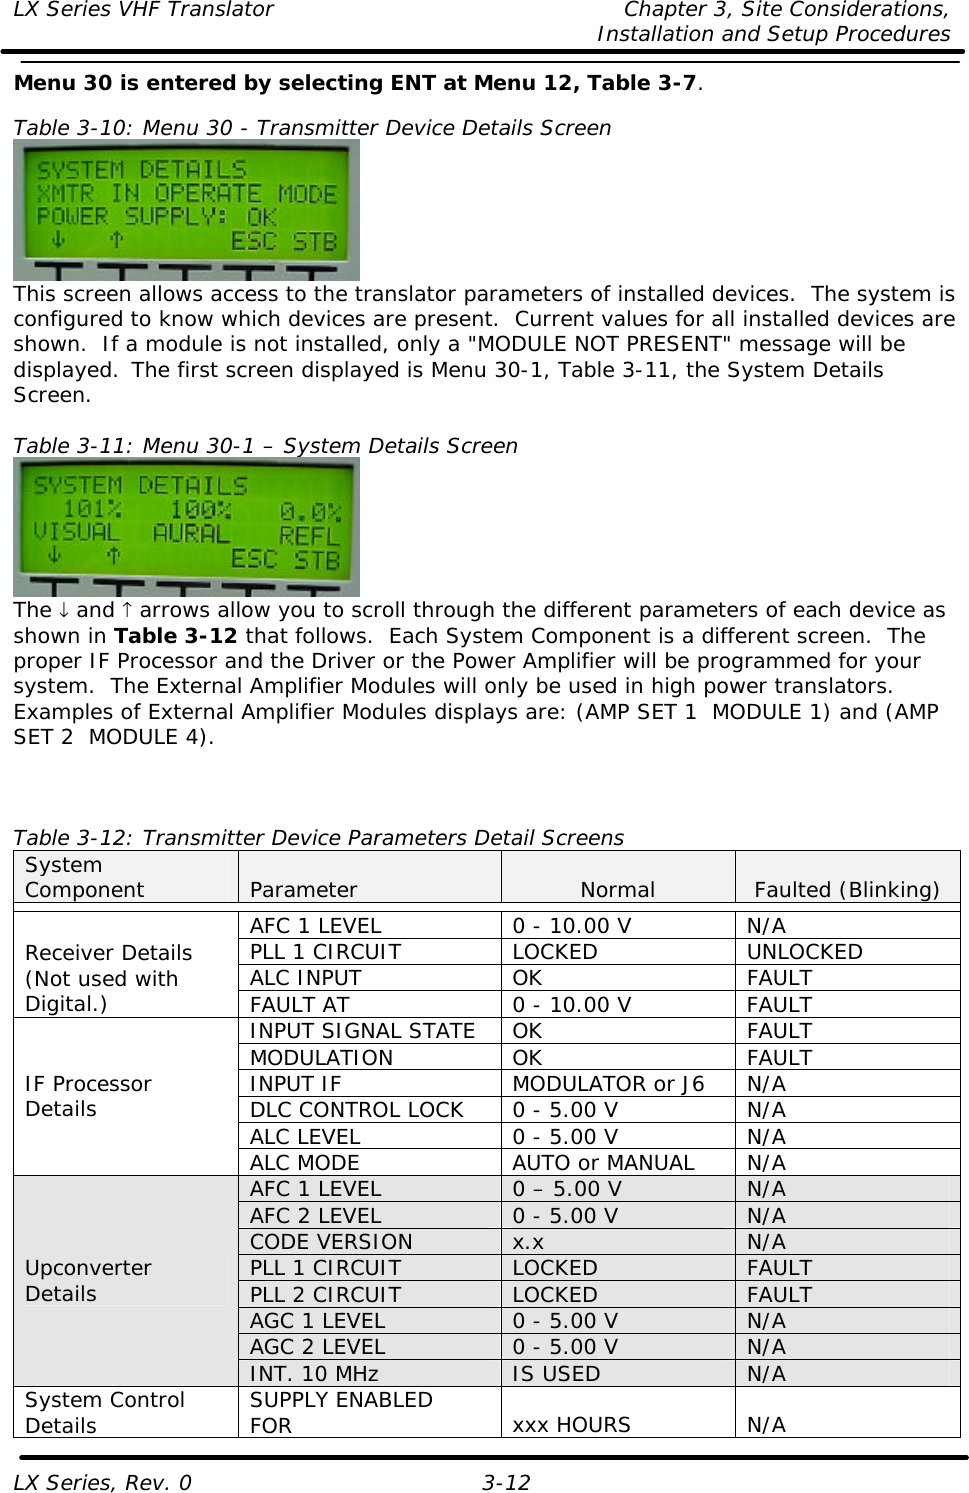 LX Series VHF Translator Chapter 3, Site Considerations,   Installation and Setup Procedures LX Series, Rev. 0 3-12 Menu 30 is entered by selecting ENT at Menu 12, Table 3-7.  Table 3-10: Menu 30 - Transmitter Device Details Screen  This screen allows access to the translator parameters of installed devices.  The system is configured to know which devices are present.  Current values for all installed devices are shown.  If a module is not installed, only a &quot;MODULE NOT PRESENT&quot; message will be displayed.  The first screen displayed is Menu 30-1, Table 3-11, the System Details Screen.  Table 3-11: Menu 30-1 – System Details Screen  The ↓ and ↑ arrows allow you to scroll through the different parameters of each device as shown in Table 3-12 that follows.  Each System Component is a different screen.  The proper IF Processor and the Driver or the Power Amplifier will be programmed for your system.  The External Amplifier Modules will only be used in high power translators.  Examples of External Amplifier Modules displays are: (AMP SET 1  MODULE 1) and (AMP SET 2  MODULE 4).    Table 3-12: Transmitter Device Parameters Detail Screens System Component Parameter Normal Faulted (Blinking)  AFC 1 LEVEL 0 - 10.00 V N/A PLL 1 CIRCUIT LOCKED UNLOCKED ALC INPUT OK FAULT Receiver Details (Not used with Digital.) FAULT AT 0 - 10.00 V FAULT INPUT SIGNAL STATE OK FAULT MODULATION OK FAULT INPUT IF MODULATOR or J6 N/A DLC CONTROL LOCK 0 - 5.00 V N/A ALC LEVEL 0 - 5.00 V N/A IF Processor Details ALC MODE AUTO or MANUAL N/A AFC 1 LEVEL 0 – 5.00 V N/A AFC 2 LEVEL 0 - 5.00 V N/A CODE VERSION x.x N/A PLL 1 CIRCUIT LOCKED FAULT PLL 2 CIRCUIT LOCKED FAULT AGC 1 LEVEL 0 - 5.00 V N/A AGC 2 LEVEL 0 - 5.00 V N/A Upconverter Details INT. 10 MHz IS USED N/A System Control Details SUPPLY ENABLED FOR xxx HOURS N/A 